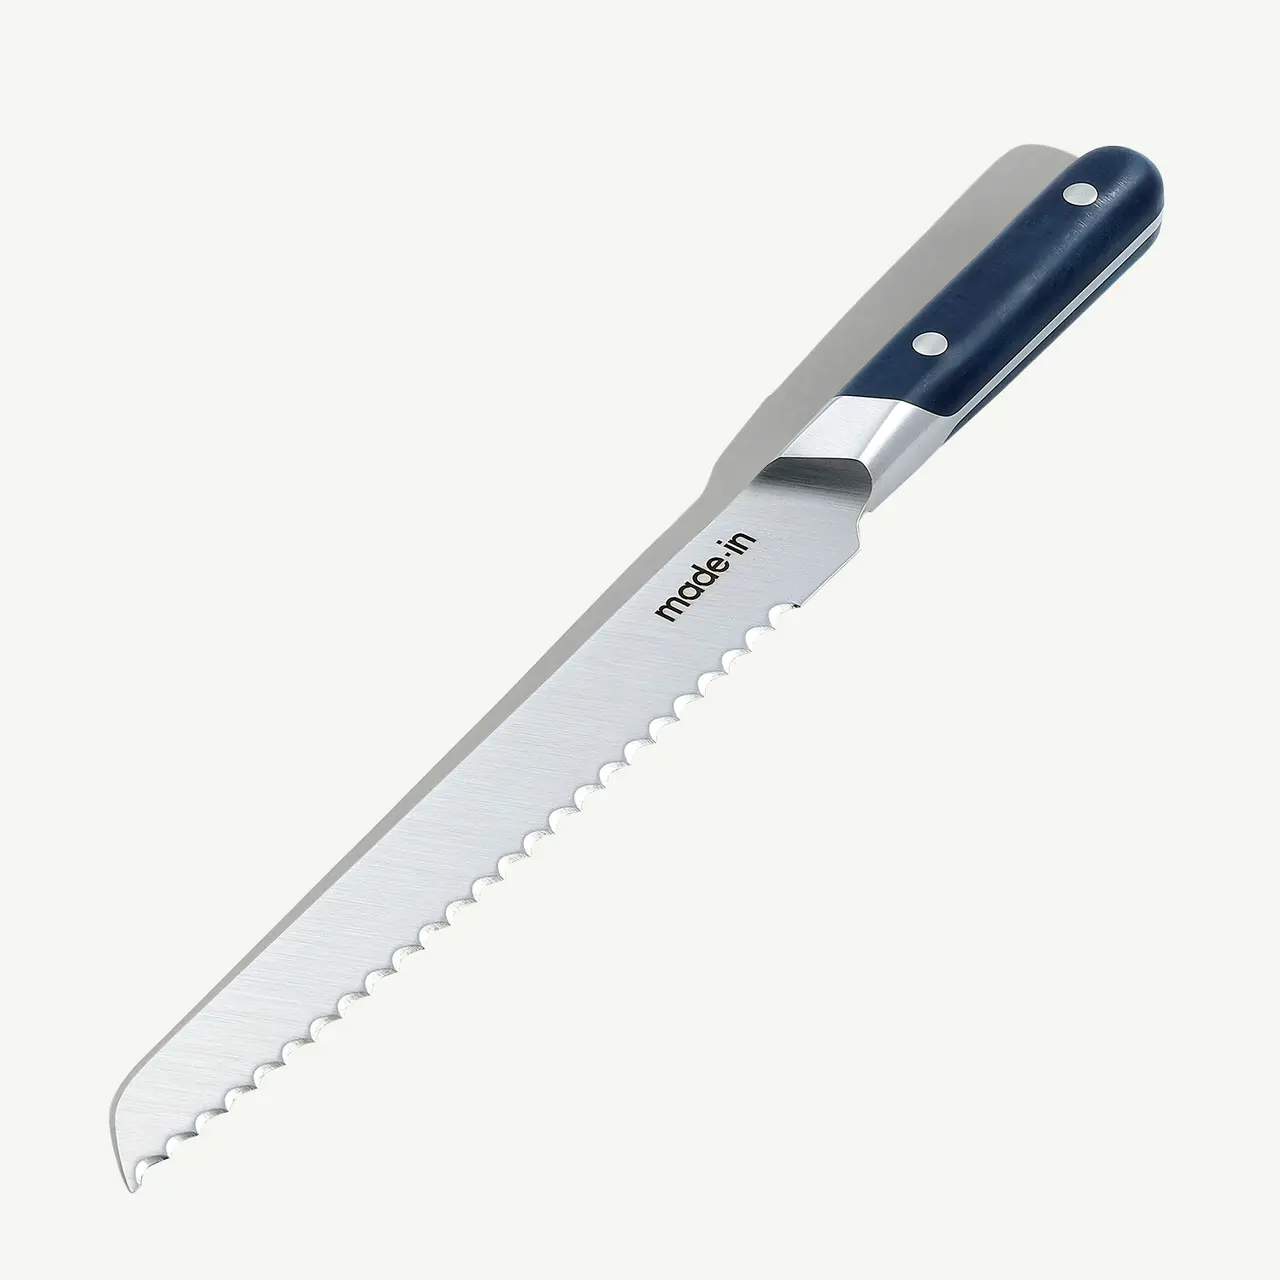 A serrated bread knife with a blue and black handle lies against a white background.